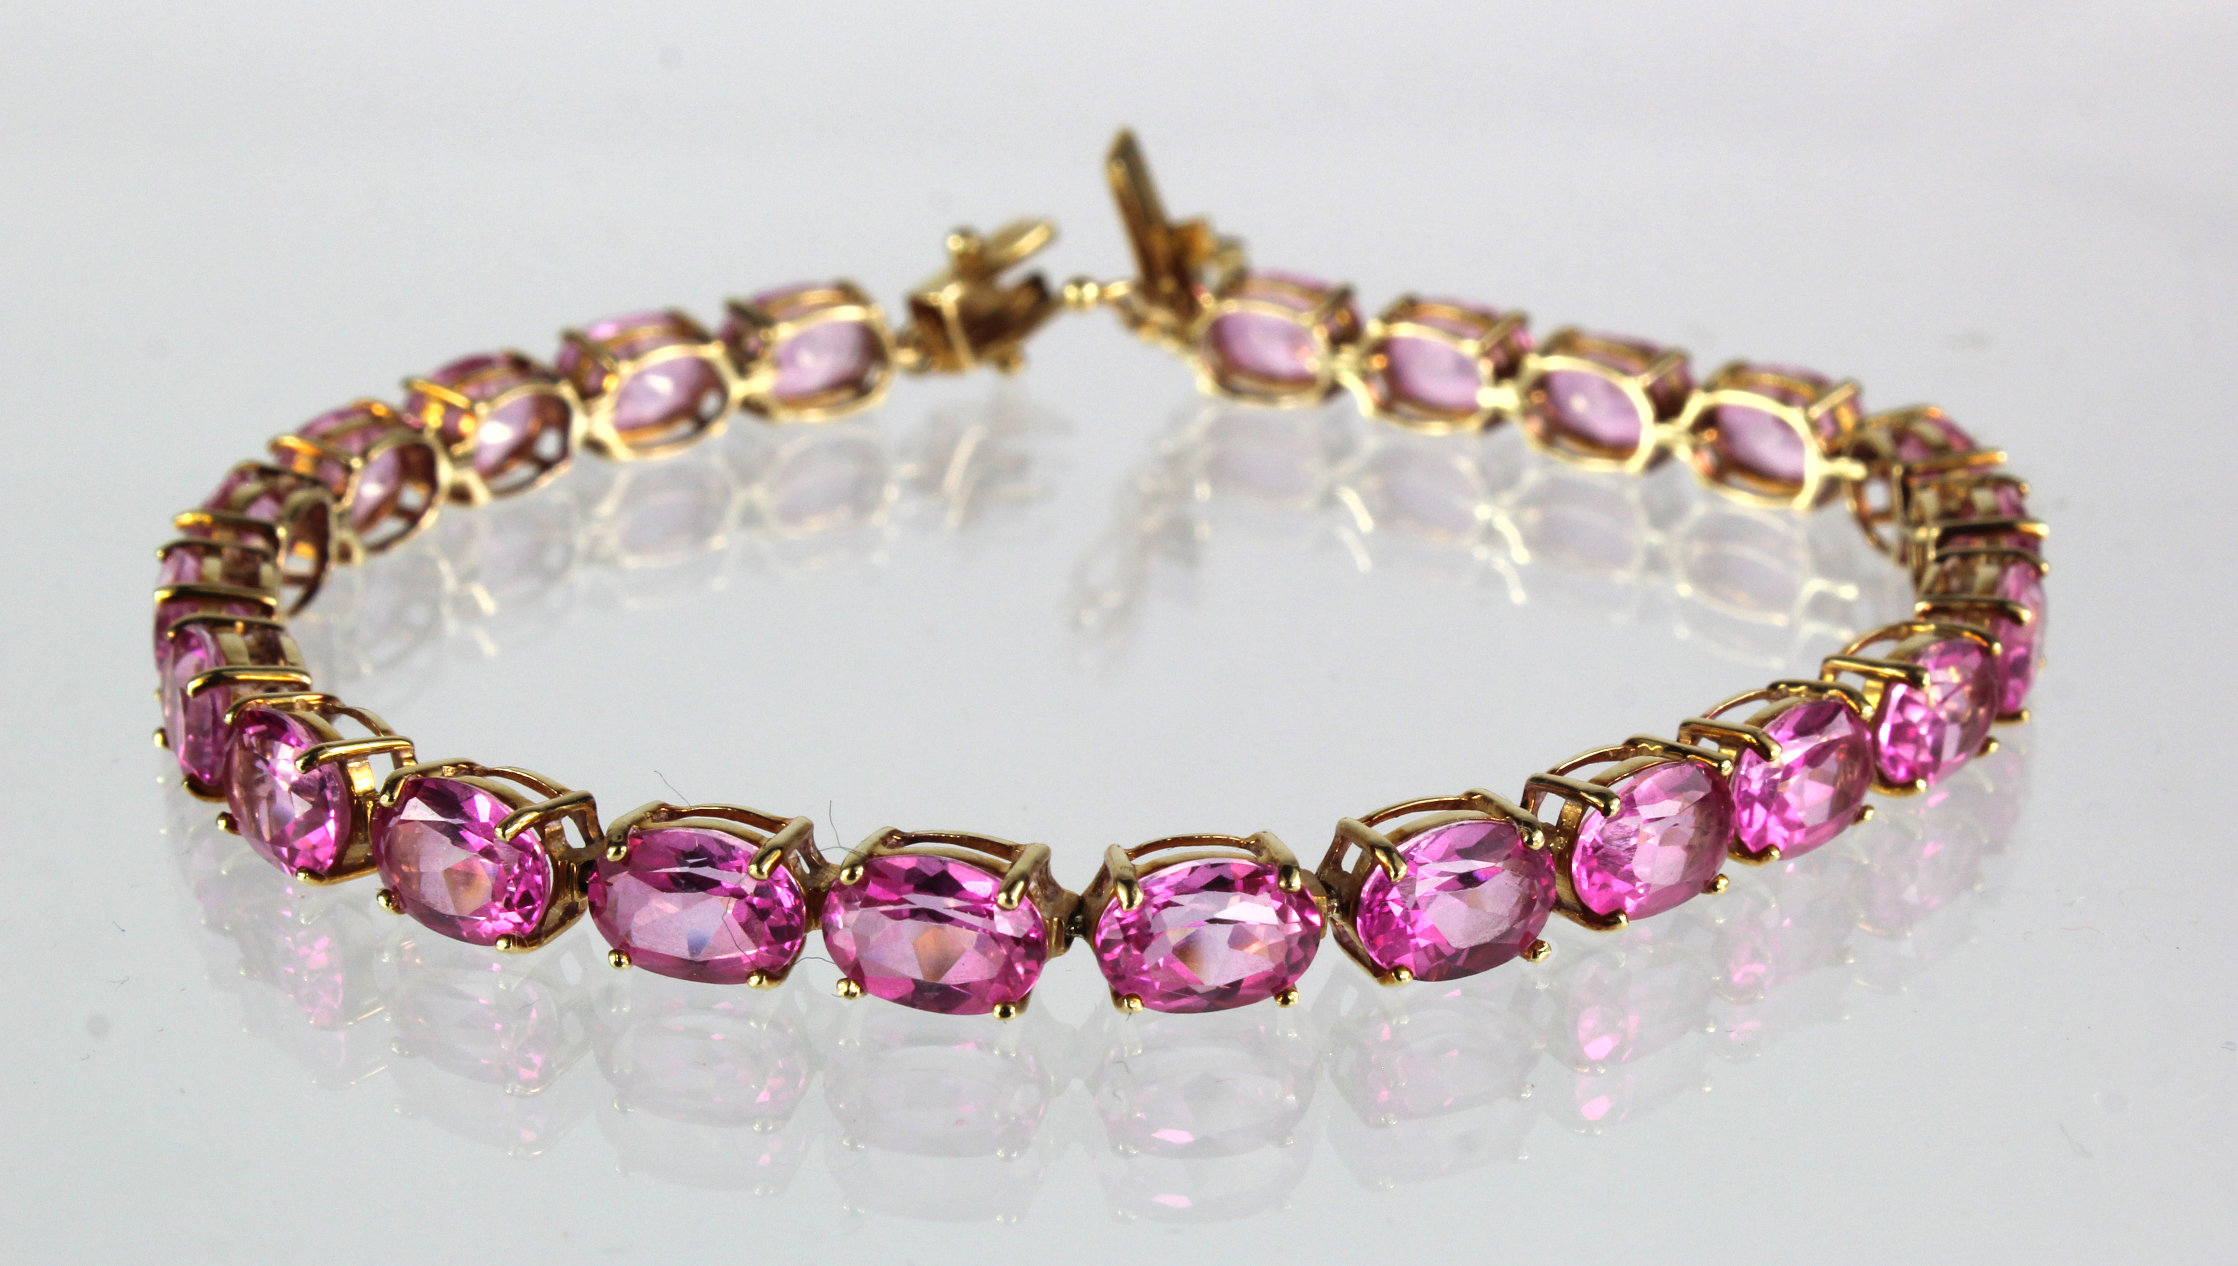 9ct yellow gold "tennis" bracelet set with oval pink Sapphire stones with box clasp and safety,